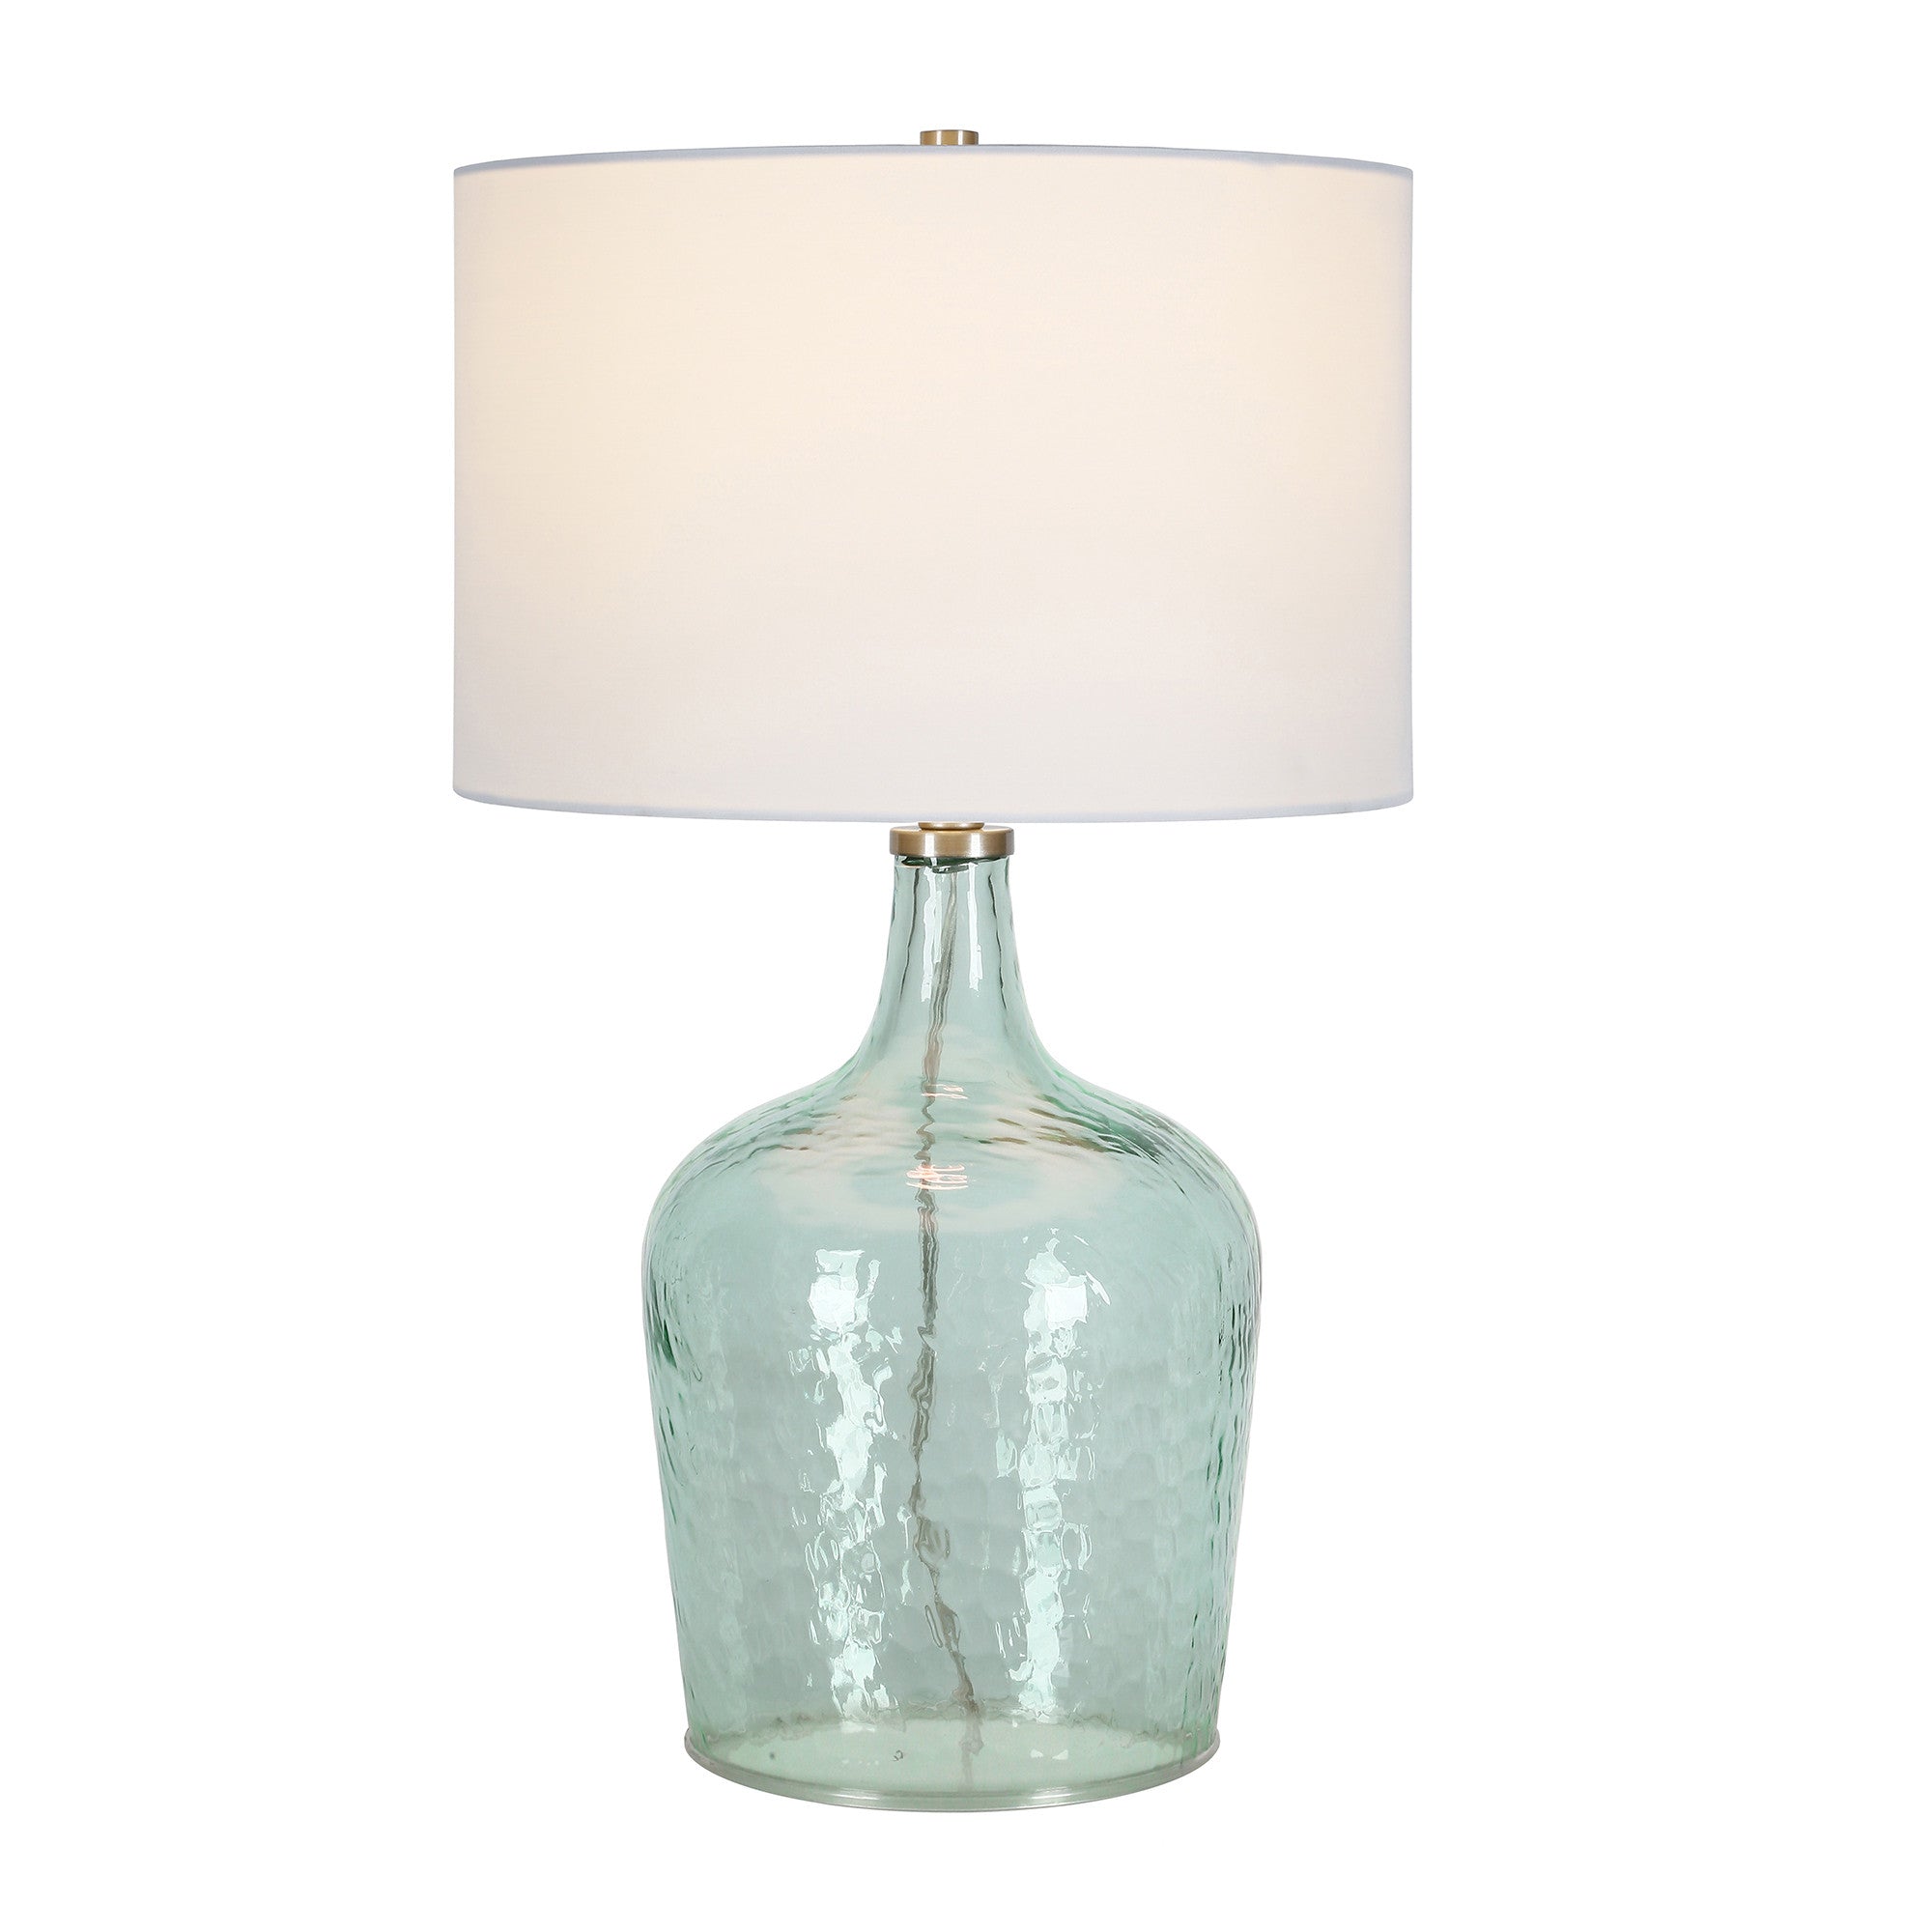 24" Blue Glass Table Lamp With White Drum Shade